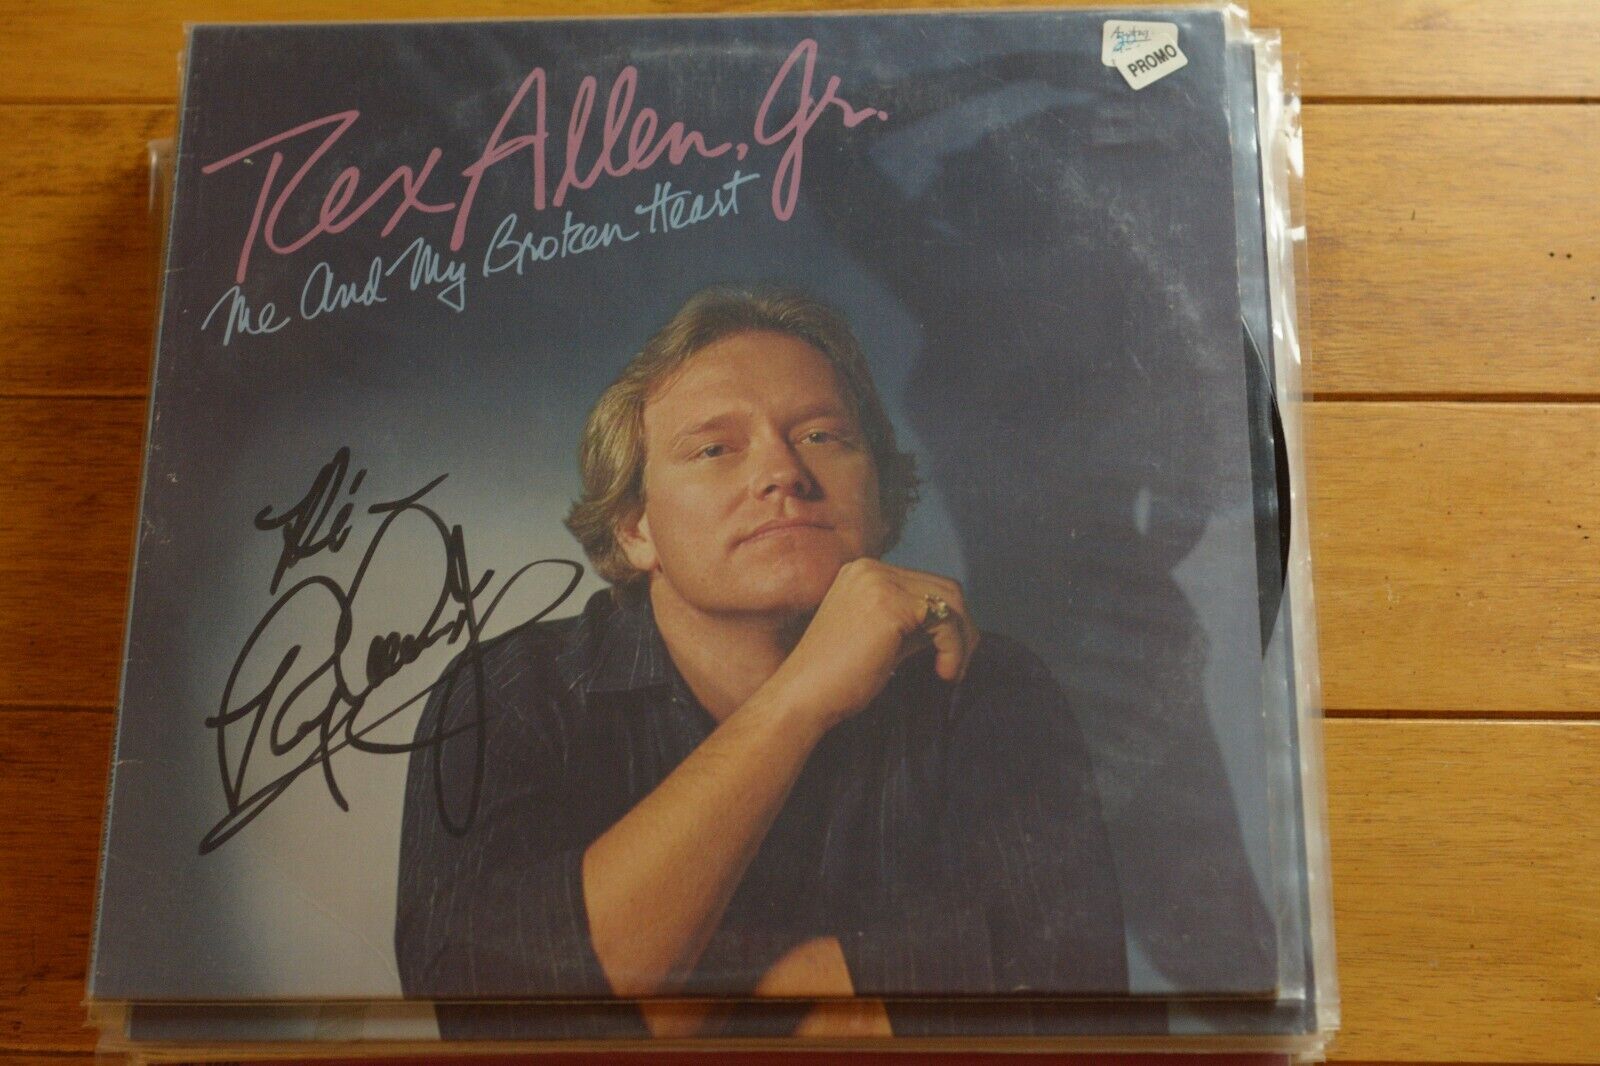 REX ALLEN JR "ME AND MY BROKEN HEART" HAND SIGNED AUTO LP PROMO RECORD VG++ [76]